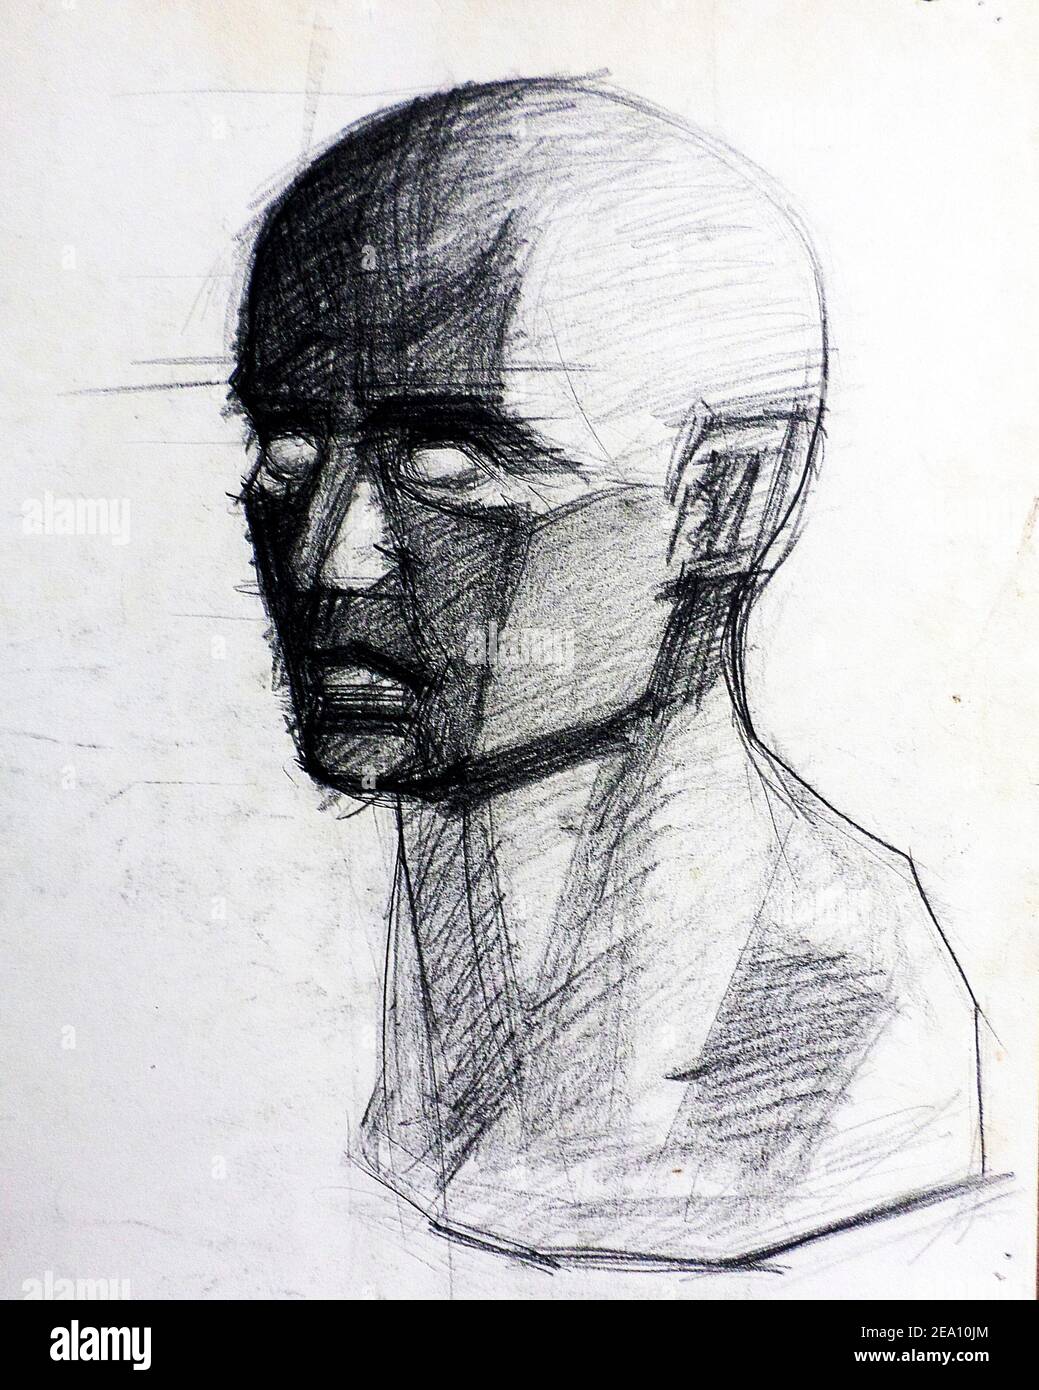 Art ,drawing ,Fine art ,Light and shadow, bust Stock Photo